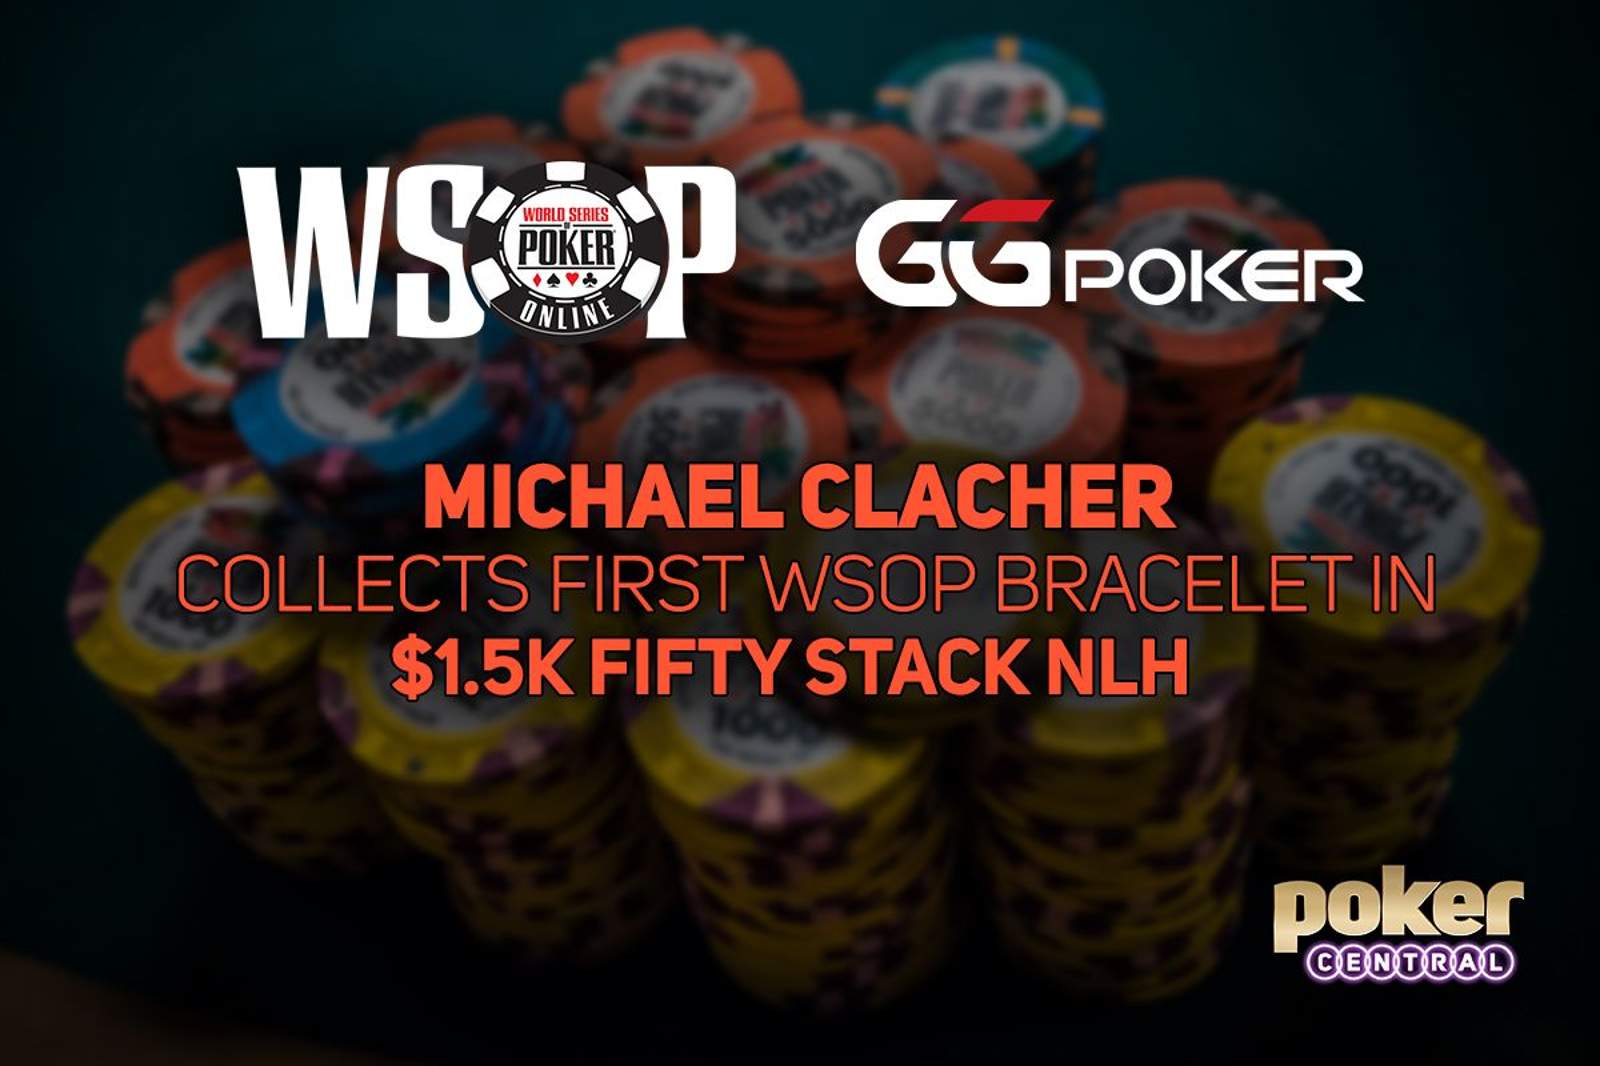 Michael Clacher Collects First Bracelet in GGPoker WSOP Online $1,500 FIFTY STACK for $297,496